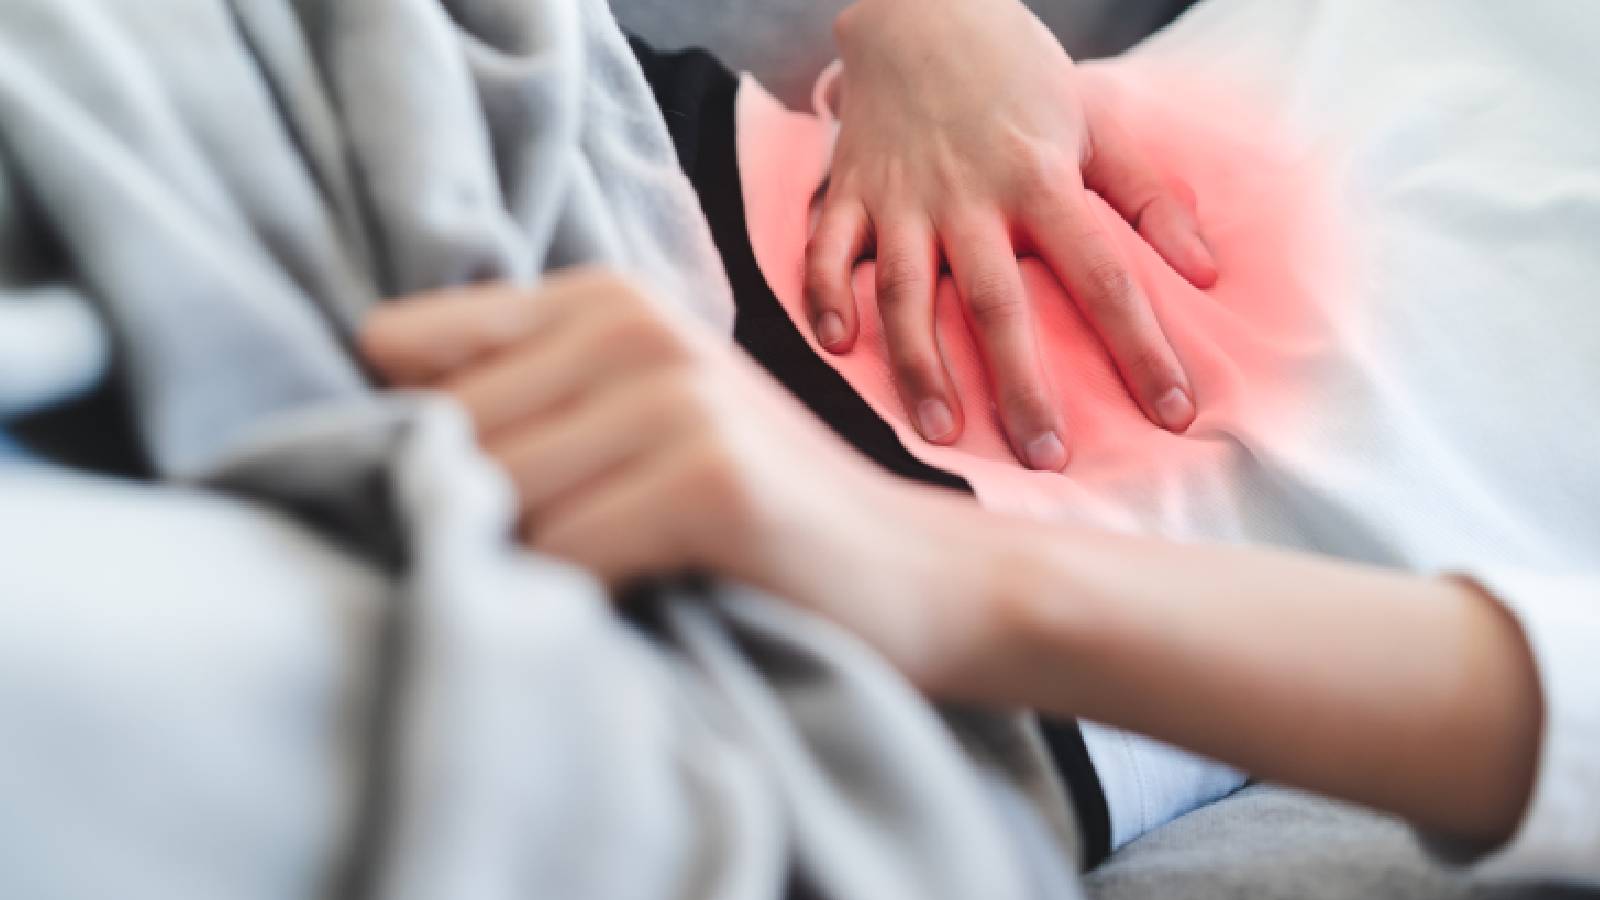 Using heating patches and pads during periods: Risk or Relief?